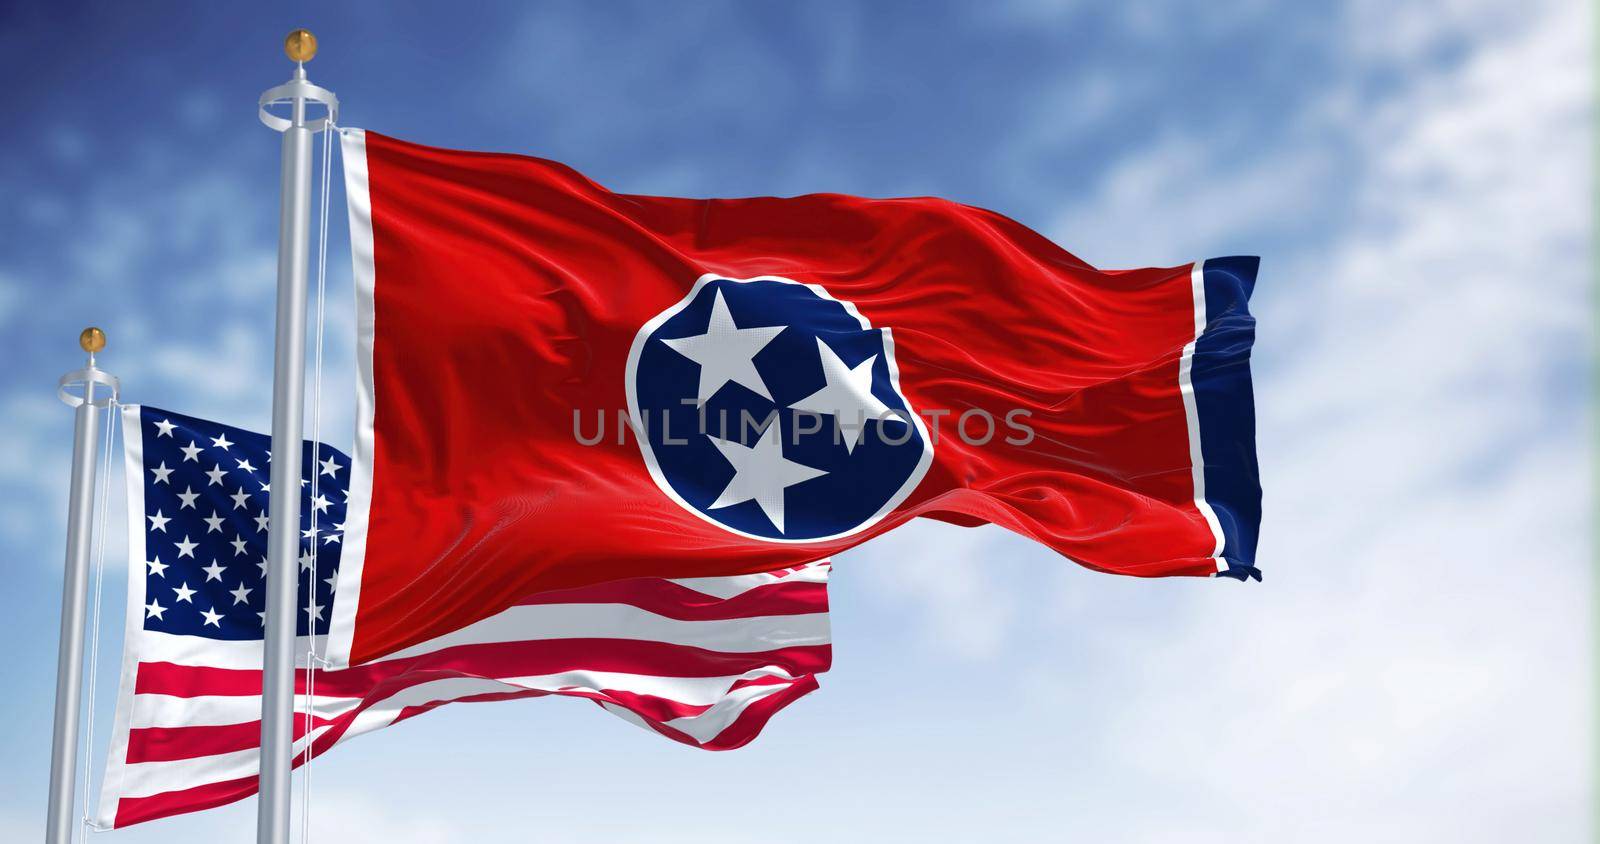 The Tennessee state flag waving along with the national flag of the United States of America by rarrarorro